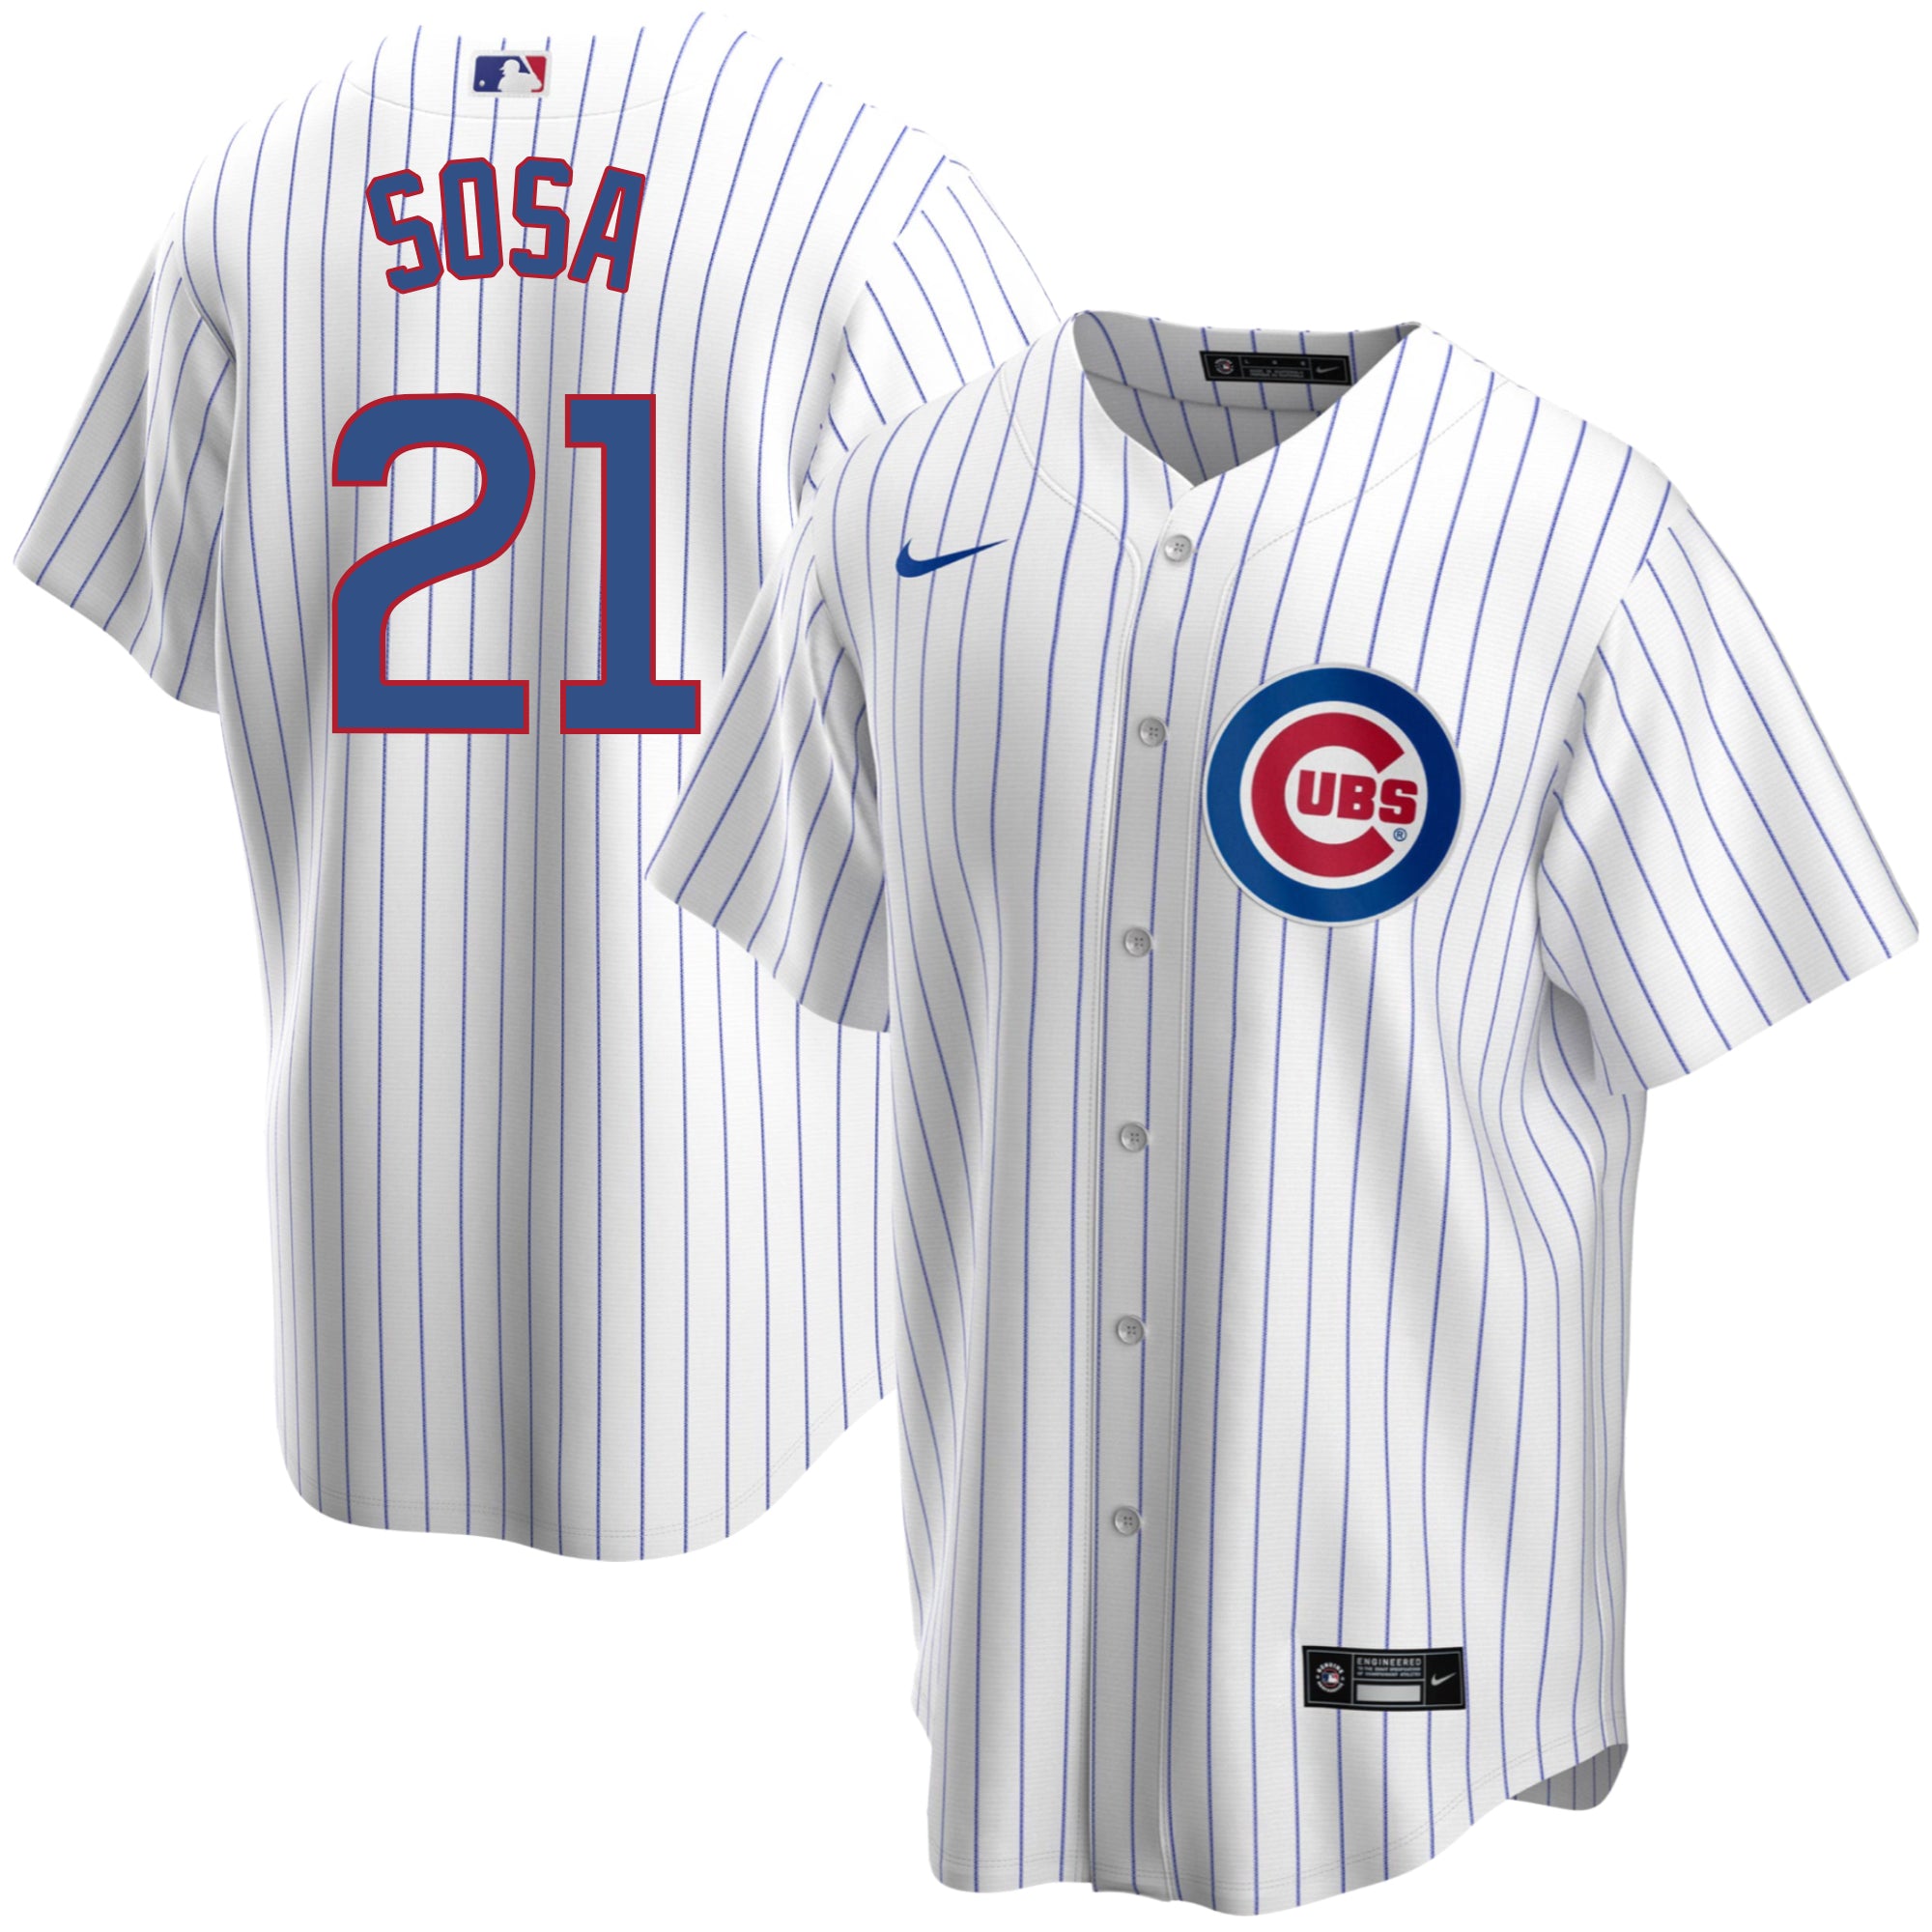 Sammy Sosa Autographed Blue Chicago Cubs Jersey - Beautifully